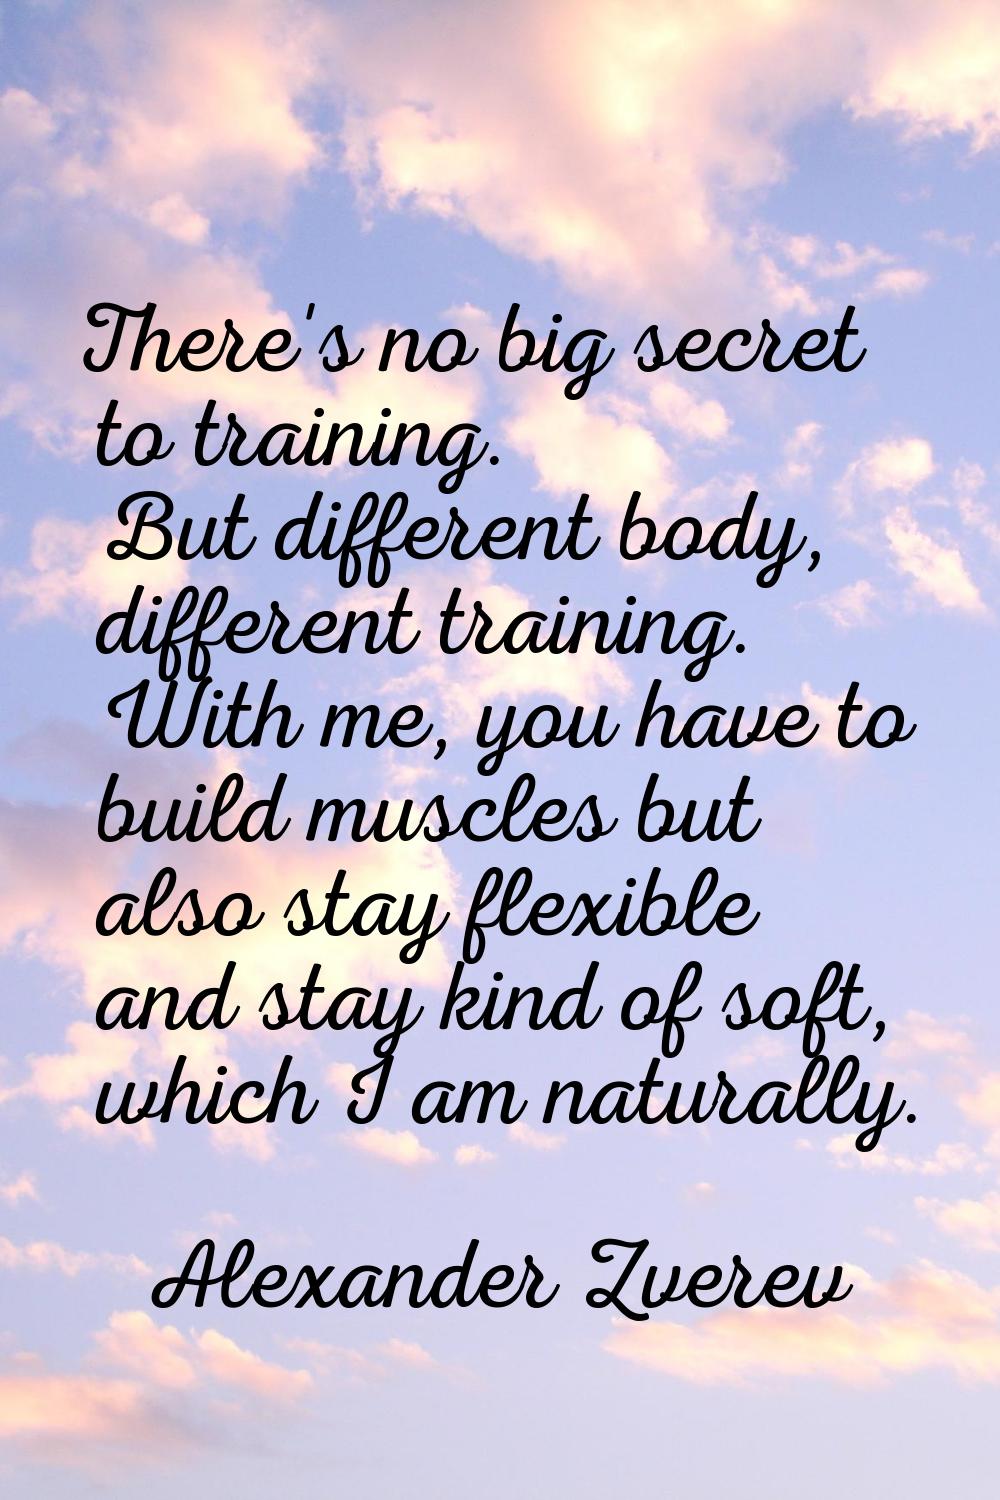 There's no big secret to training. But different body, different training. With me, you have to bui